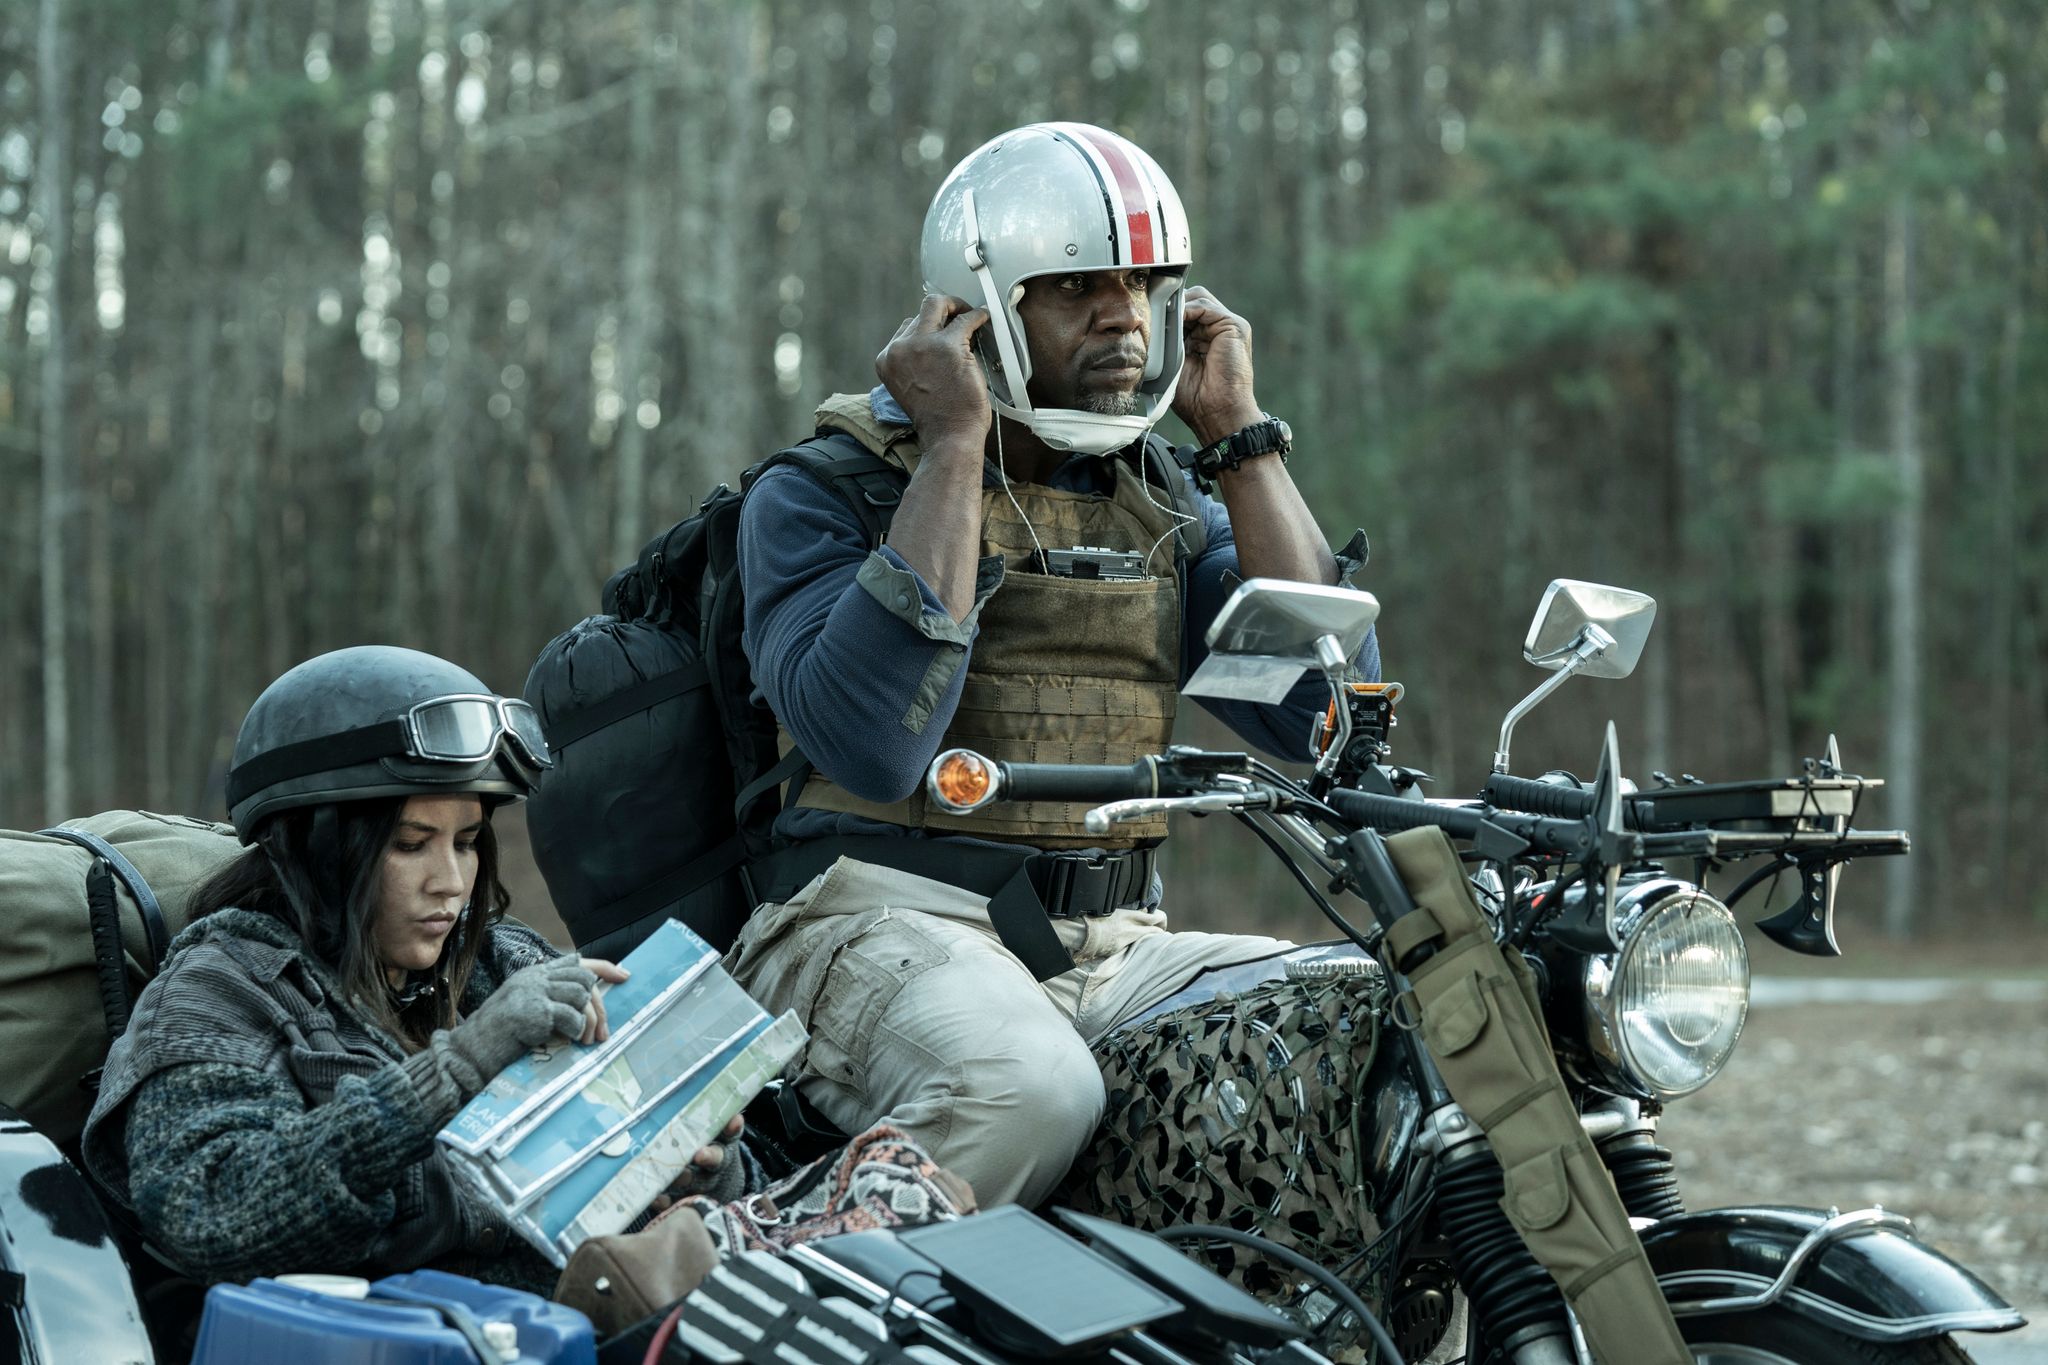 Terry Crews as Joe and Olivia Munn as Evie in character in Tales of the Walking Dead getting set to ride off somewhere on a motorcycle with a sidecar